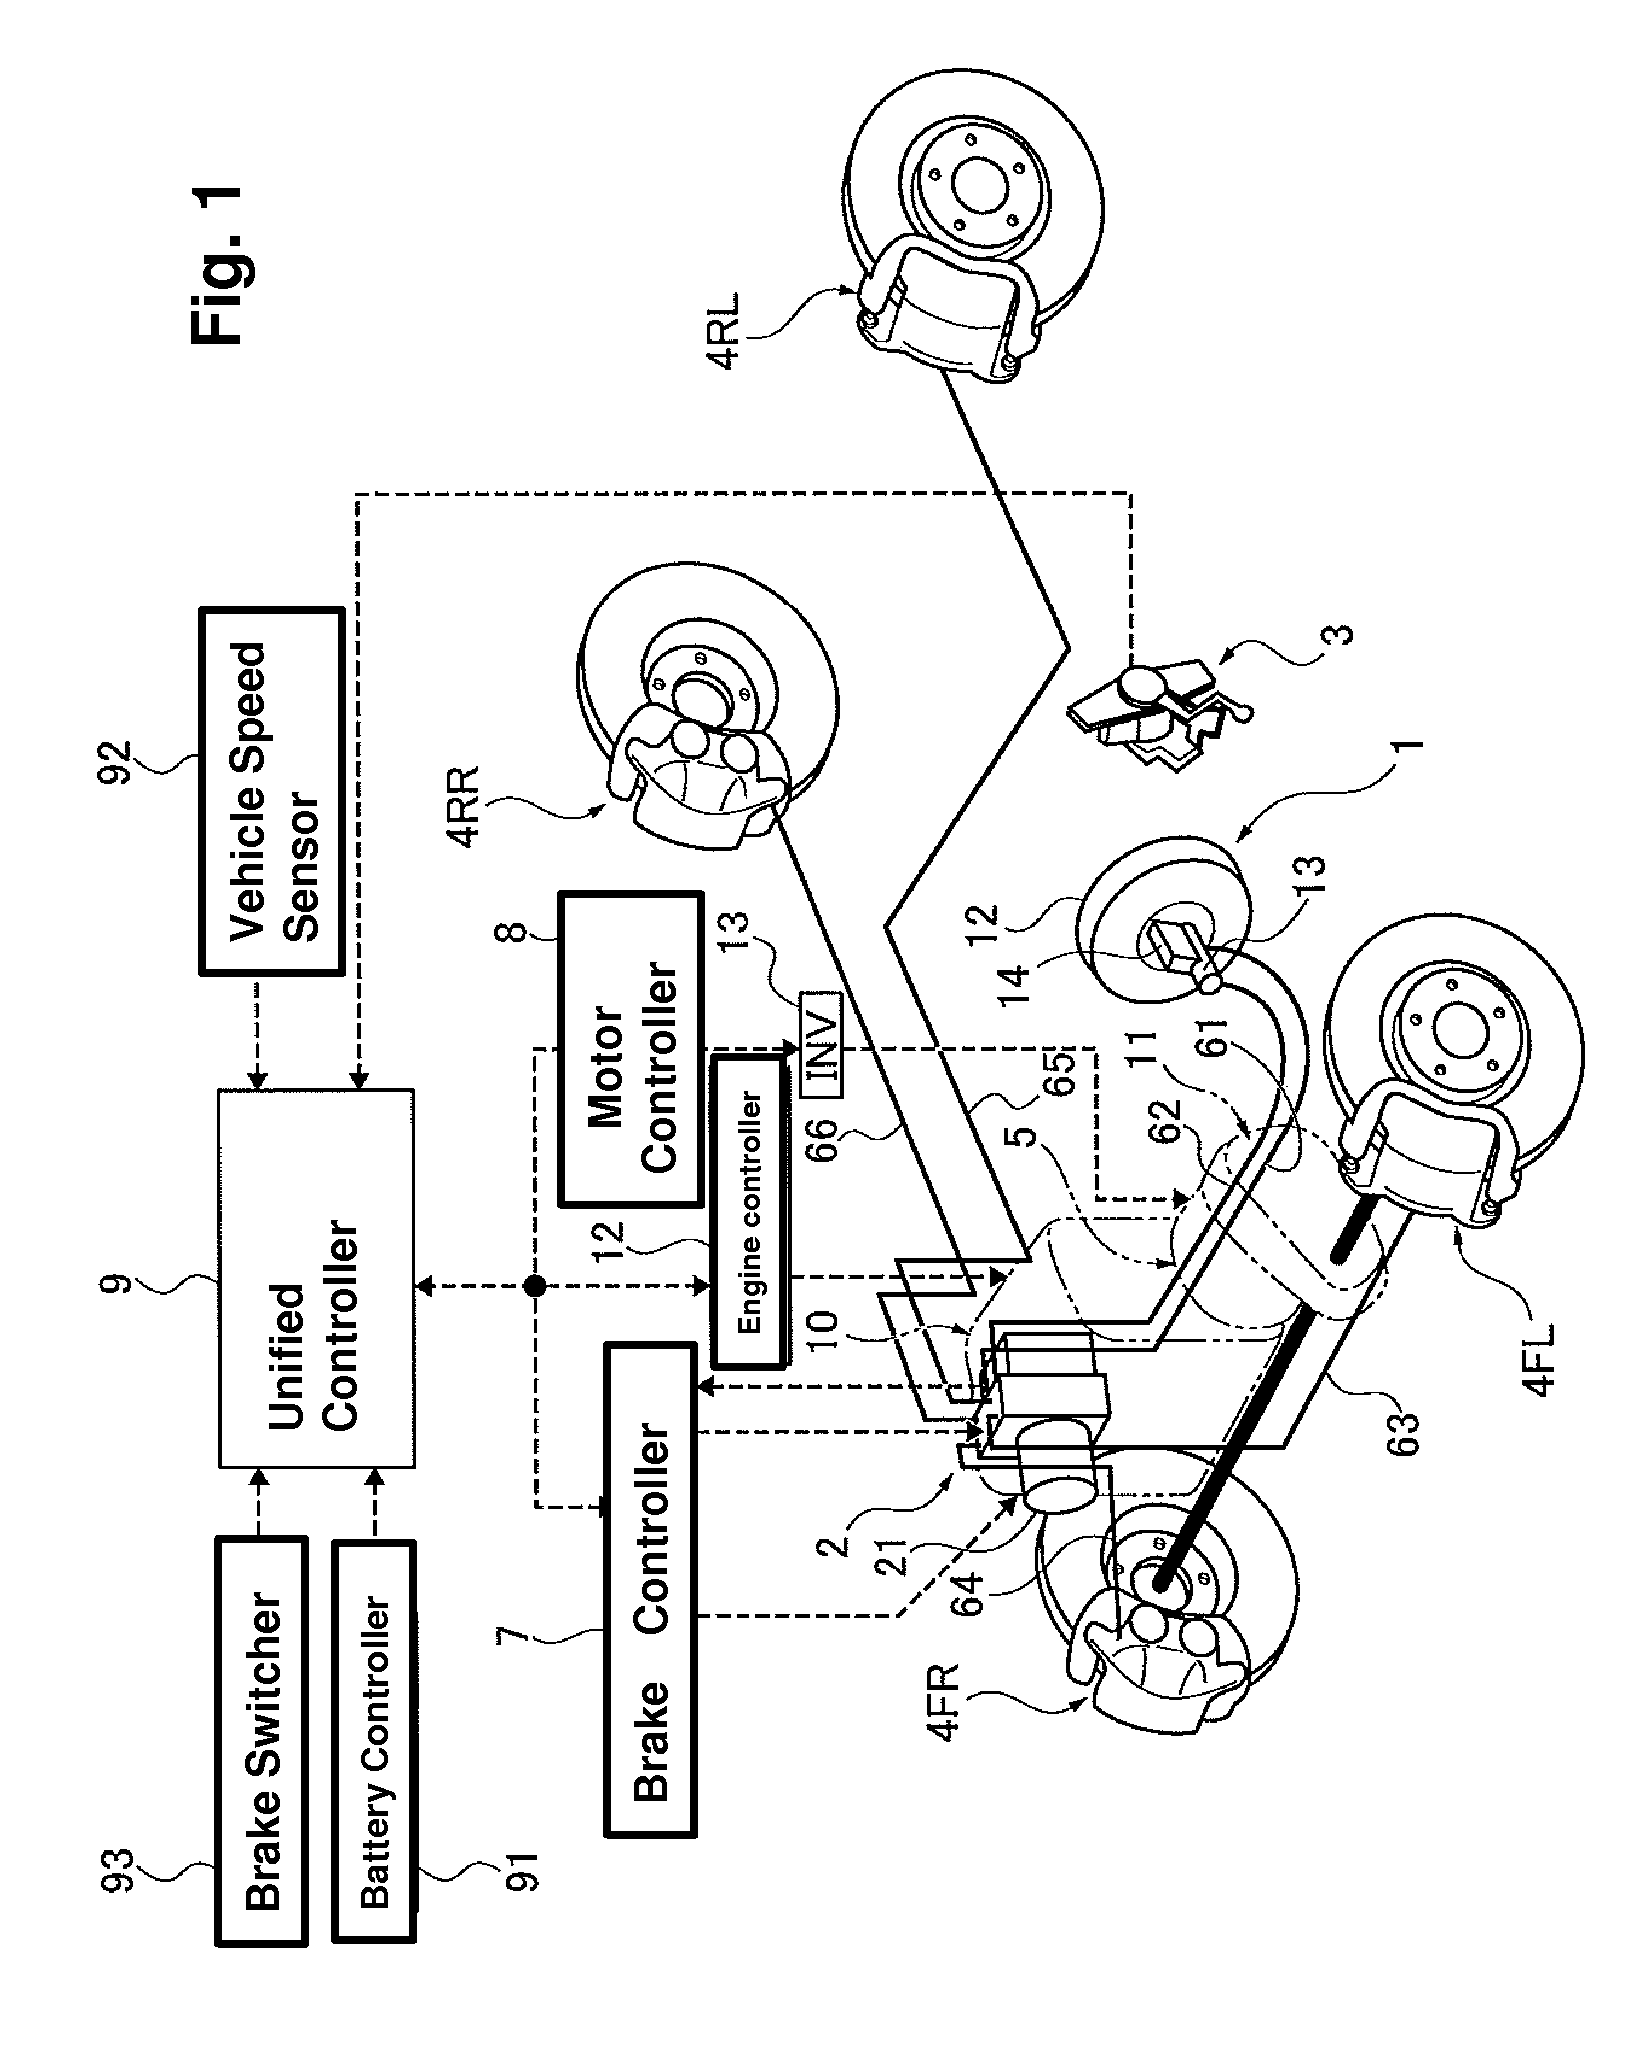 Brake control system for an electrically driven vehicle